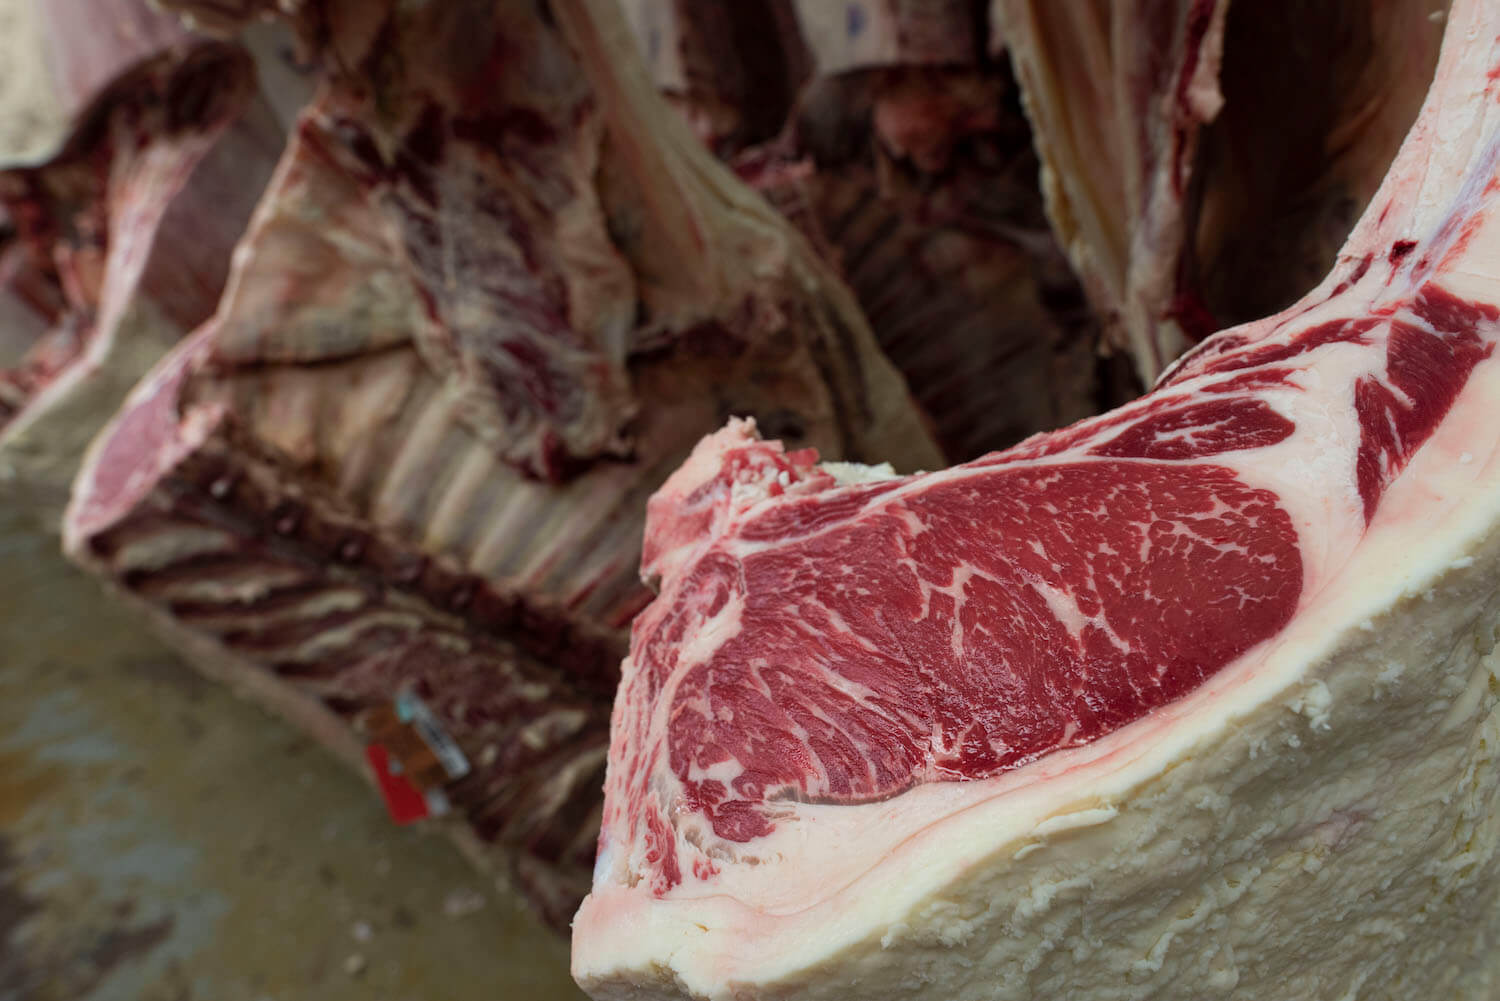 Cattle carcasses hanging showing a graded beef steak. (May 2020)